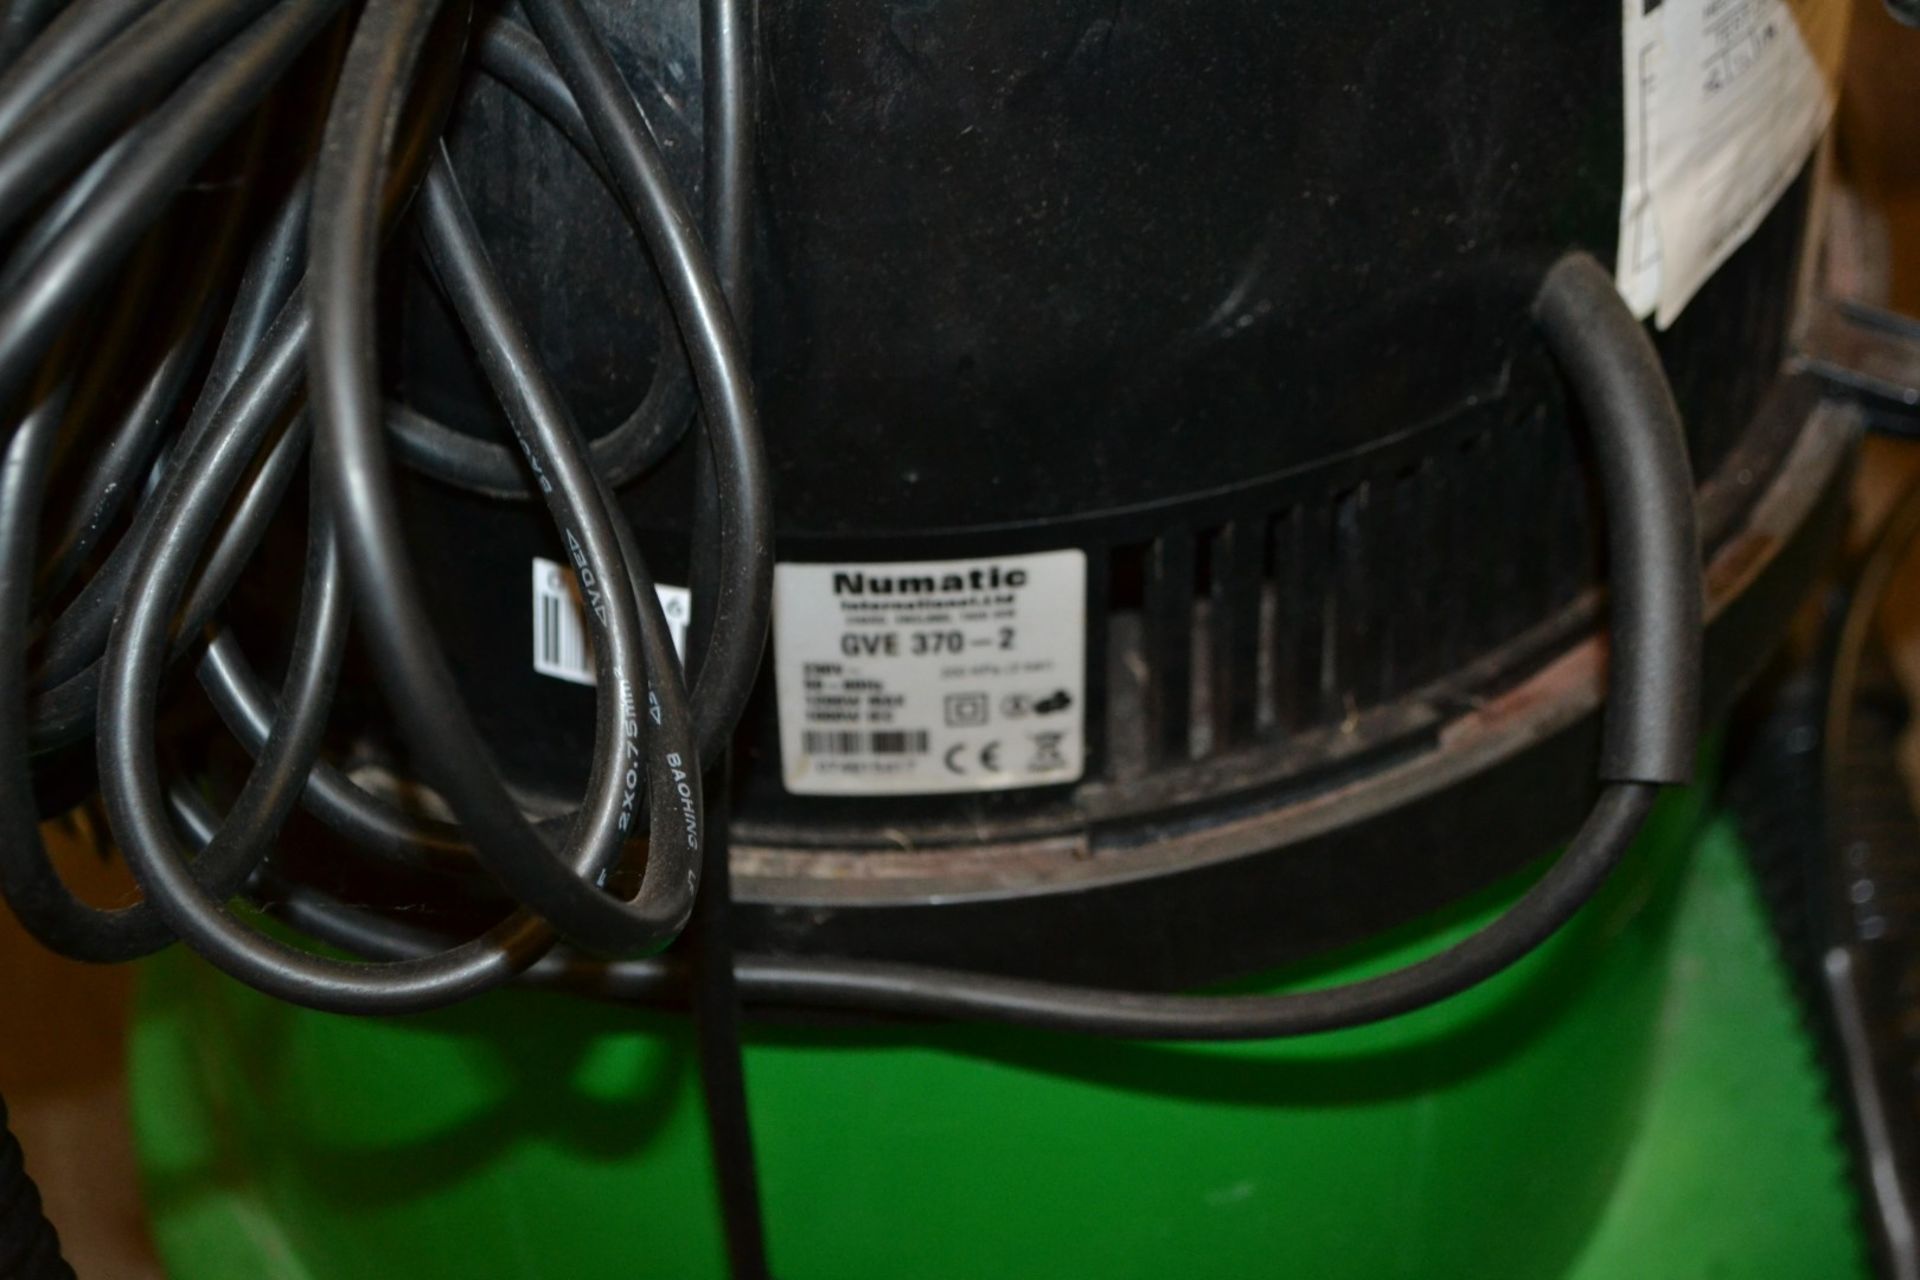 5 x Green Numatic Commercial Vacuum Cleaners GVE 370-2- Ref: VM415 - CL409 - Location: WF16 - Image 5 of 5